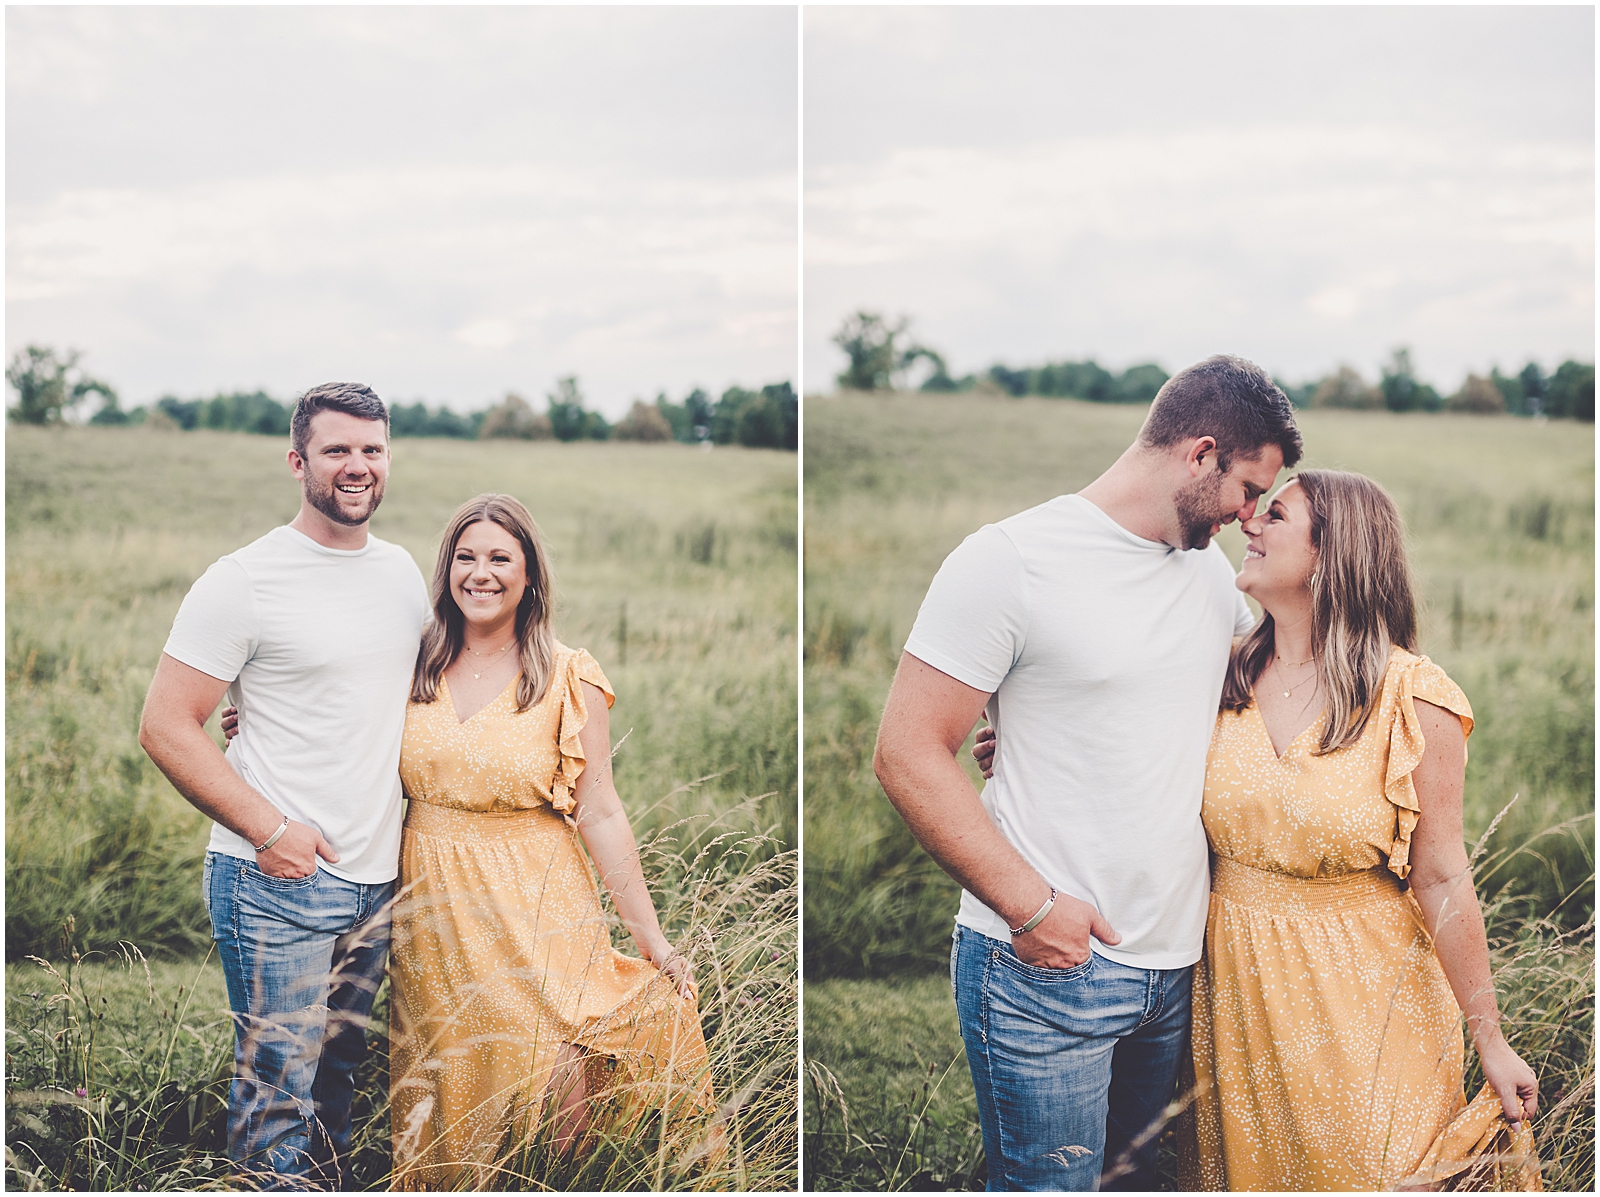 Lakyn and James's summer anniversary session in Alexander, IL with Chicagoland wedding photographer Kara Evans Photographer.